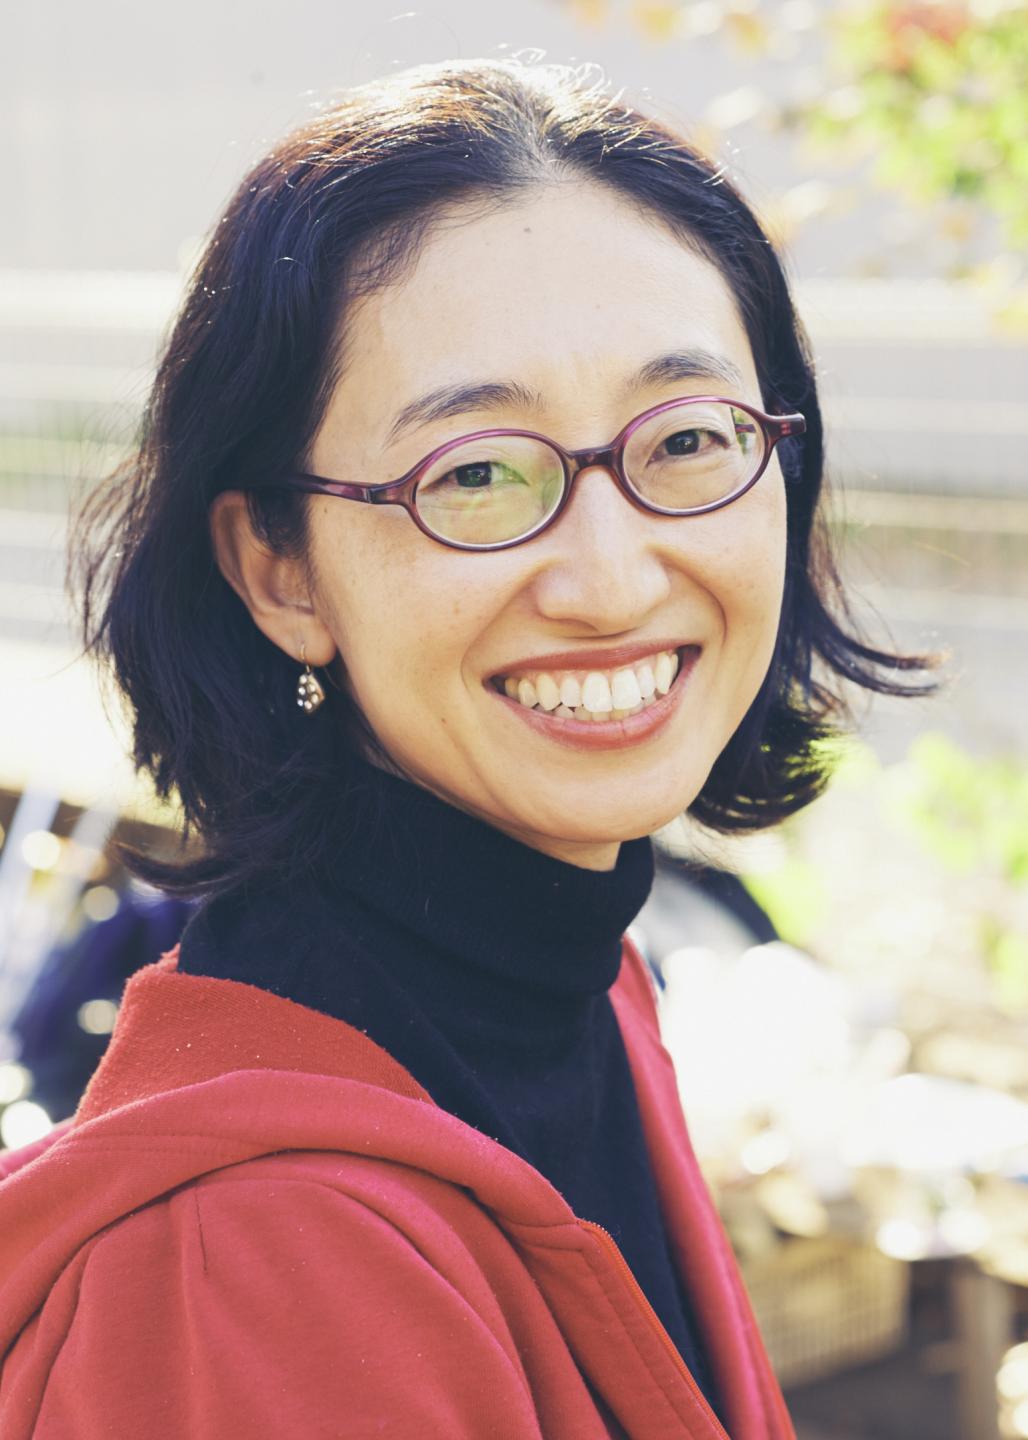 Photo of Sawako Nakayasu by Mitsuo Okamoto. Sawako, a Japanese woman with medium-short black hair of uneven length, is wearing a red hoodie, black turtleneck, one visible earring, and purple glasses. She is slightly angled, looking this way with a big smile. The background is outdoors and mostly blurry.